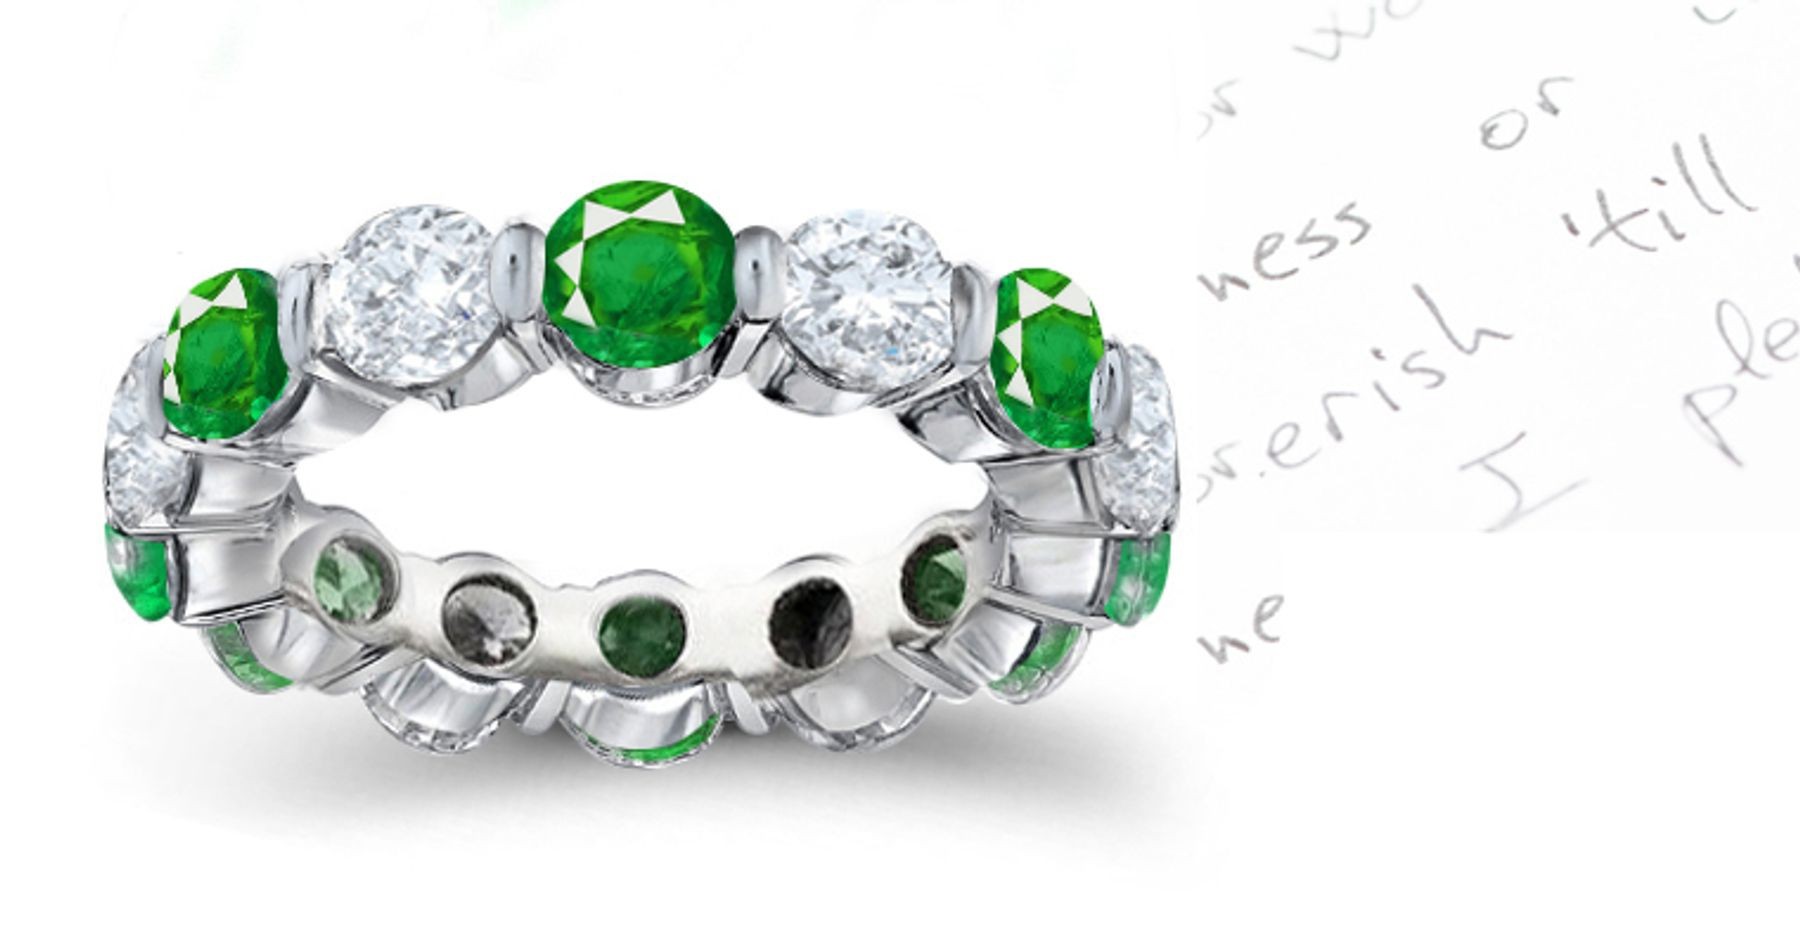 Dramatic Emerald Jewelry Eternity Rings: Well crafted round emeralds & diamond bar set in alternating fashion with colorless minimal flaw diamonds in gold or platinum settings.